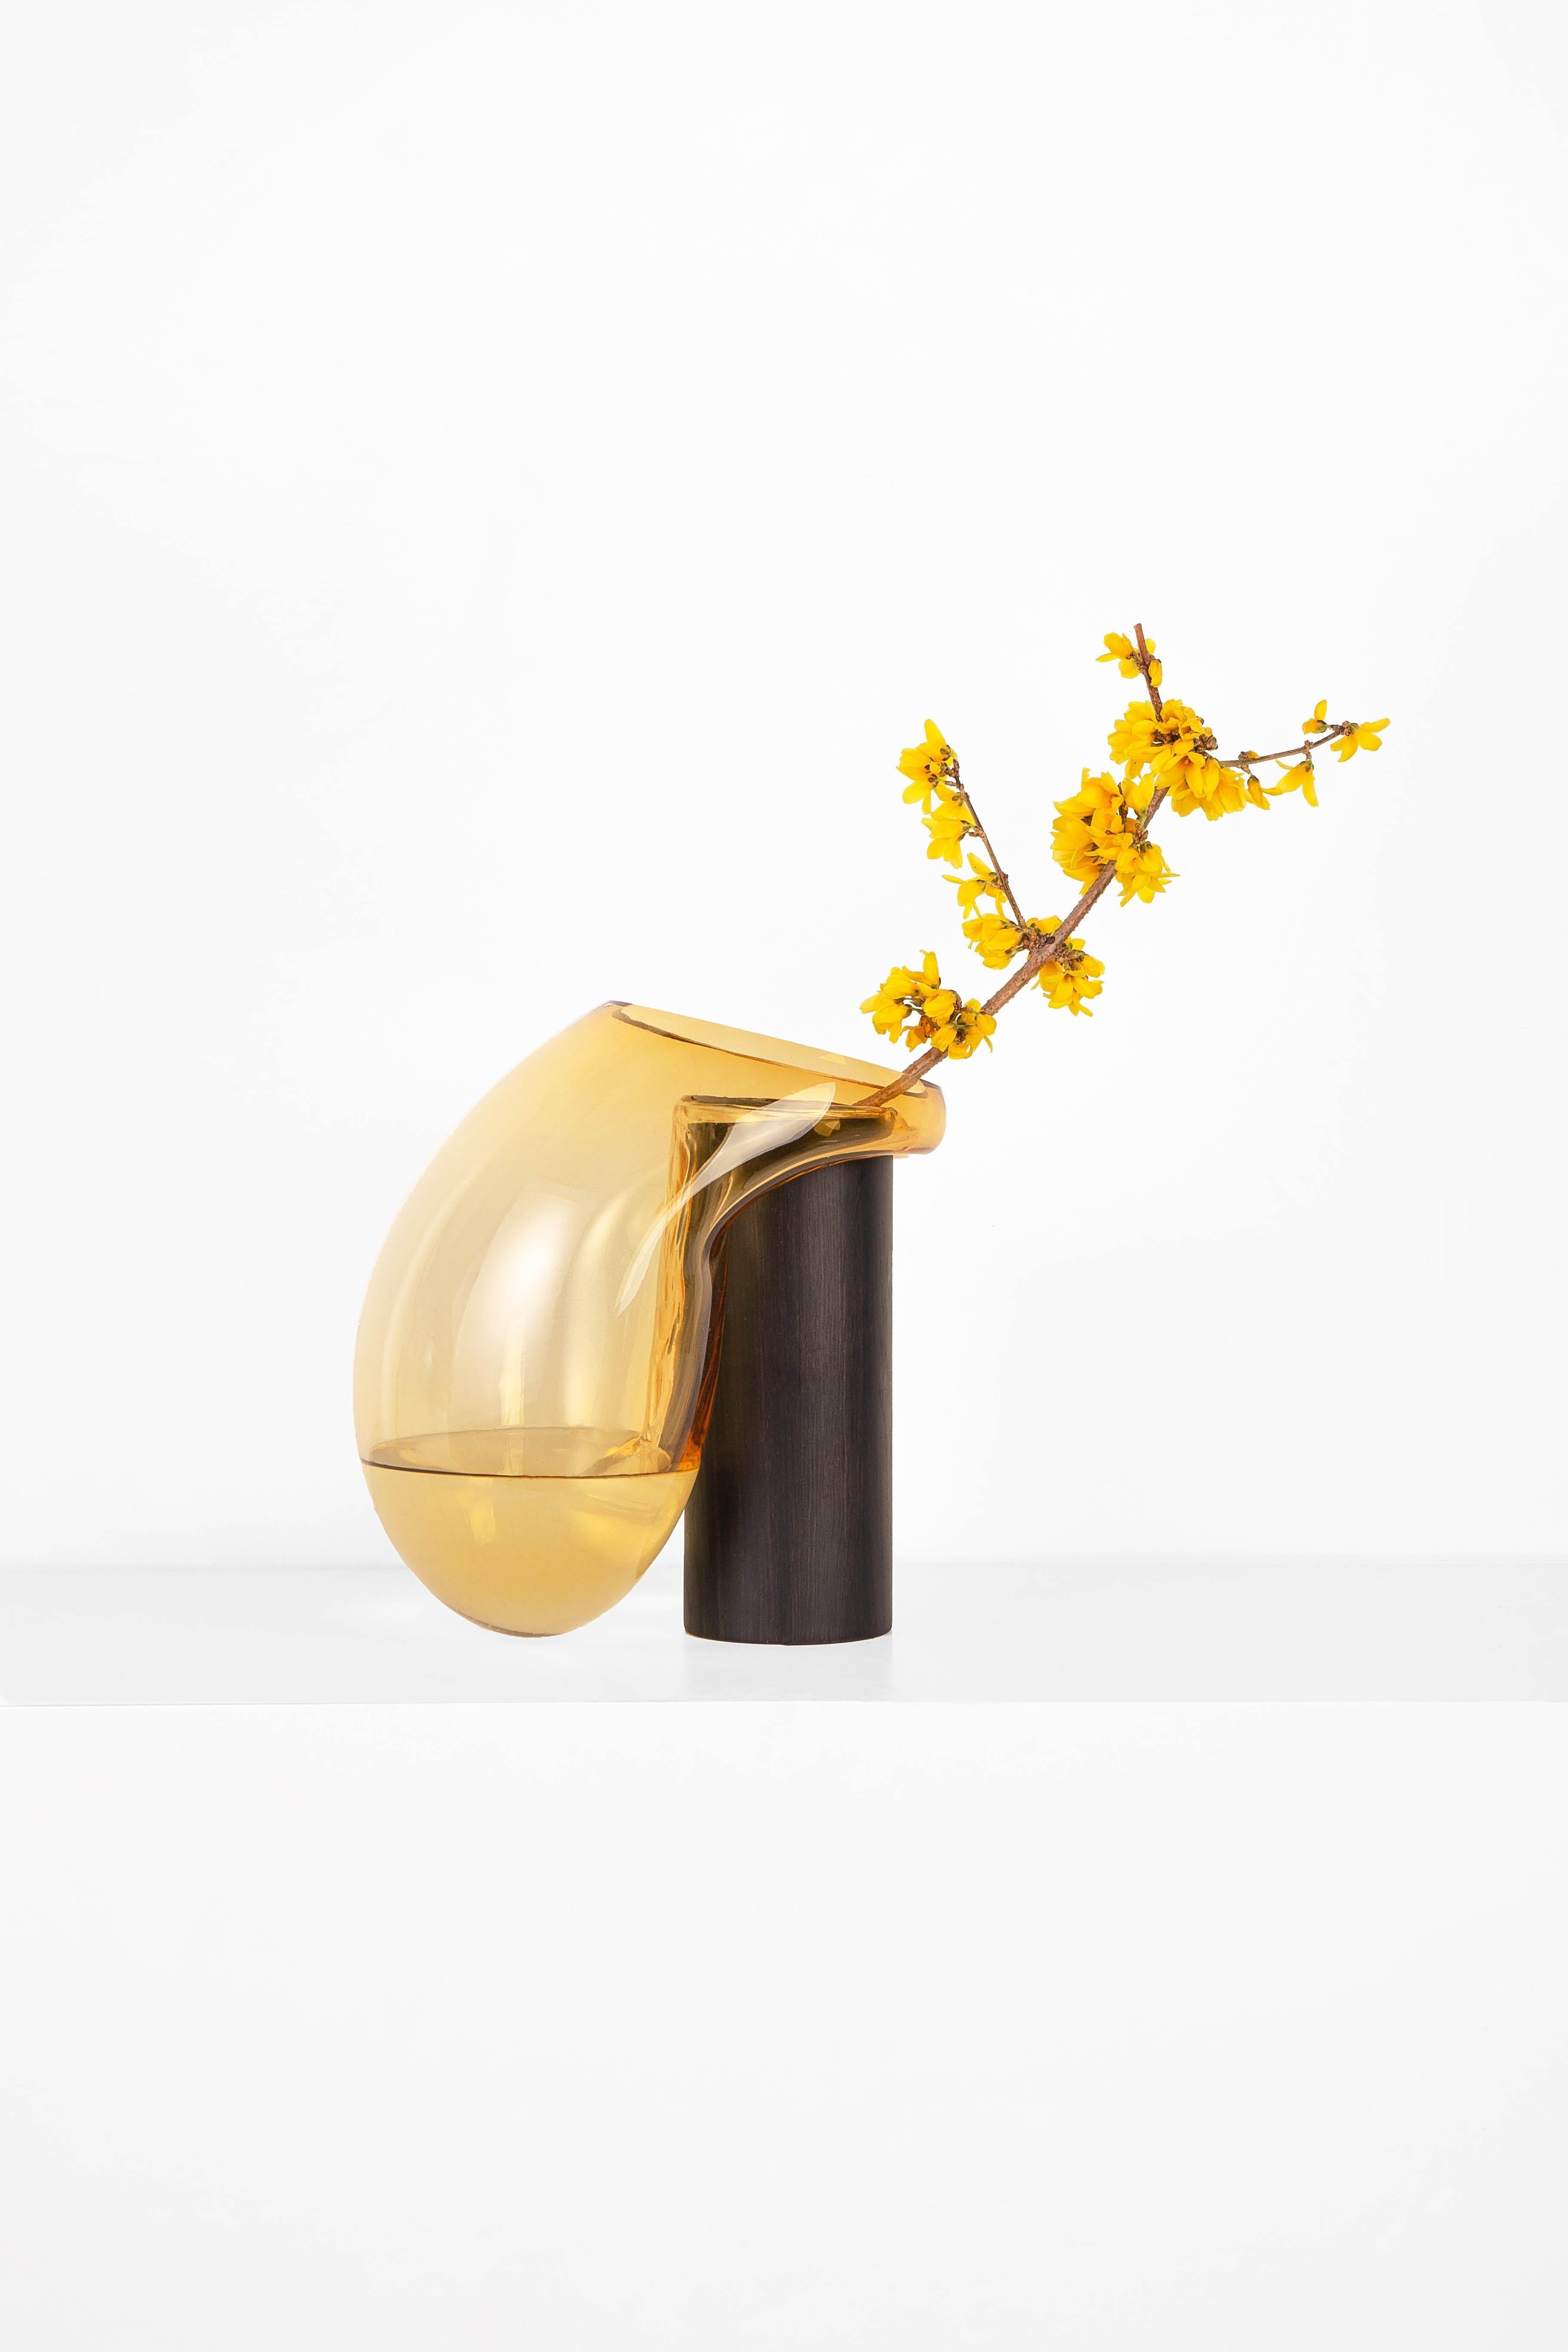 Hand-Crafted Contemporary Vase 'Gutta Boon CS2' by Noom, Large, Blown Amber Glass and Oak For Sale